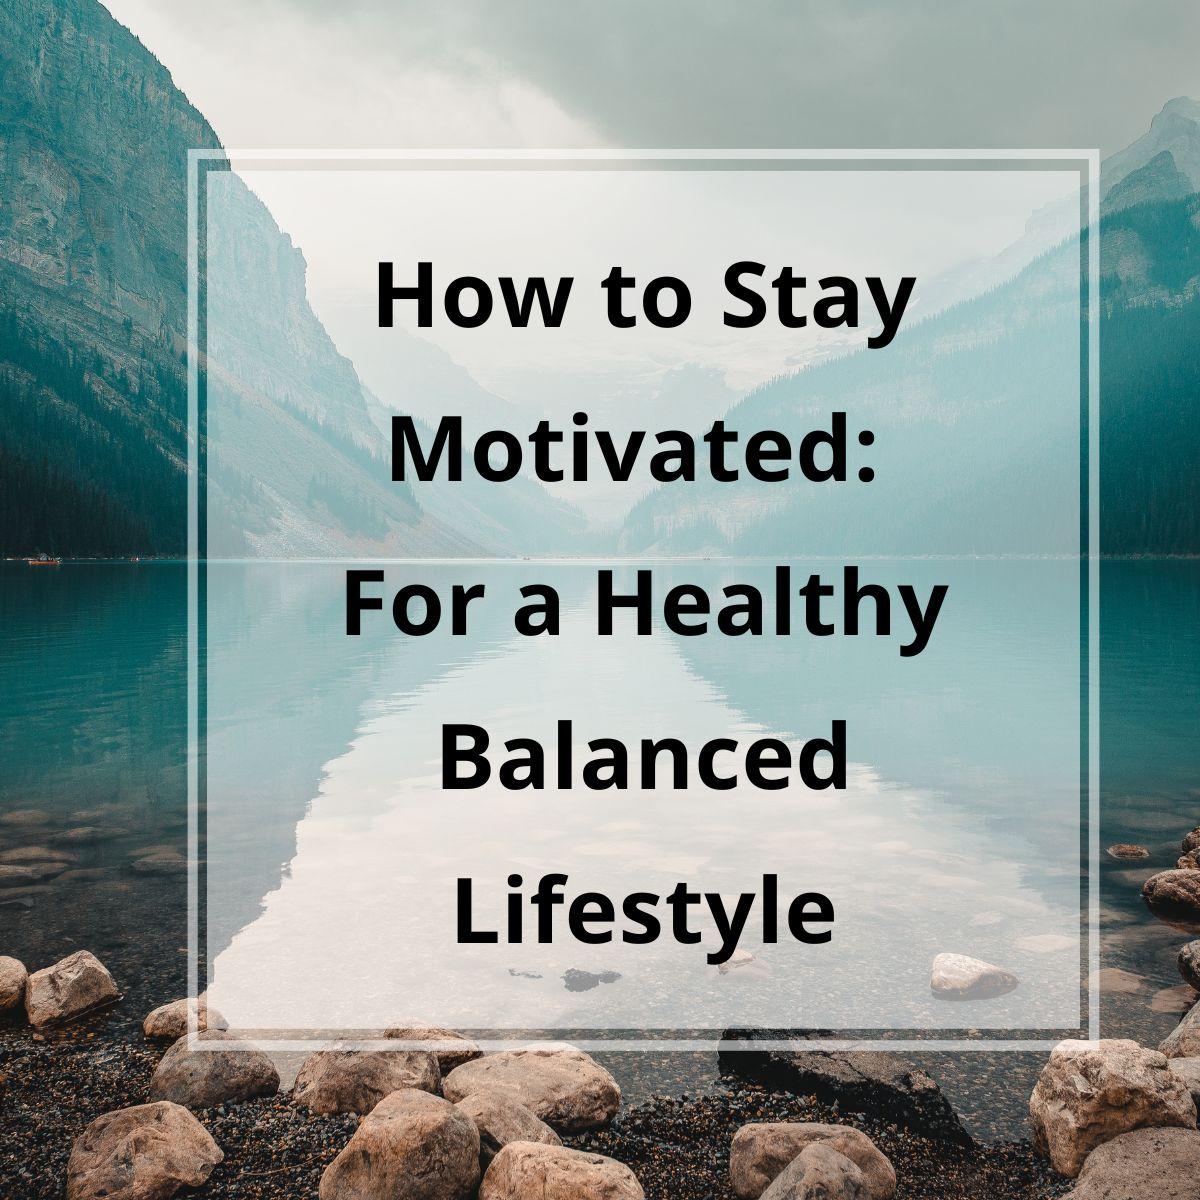 13 Tips on How to Stay Motivated: For a Healthy Balanced Lifestyle